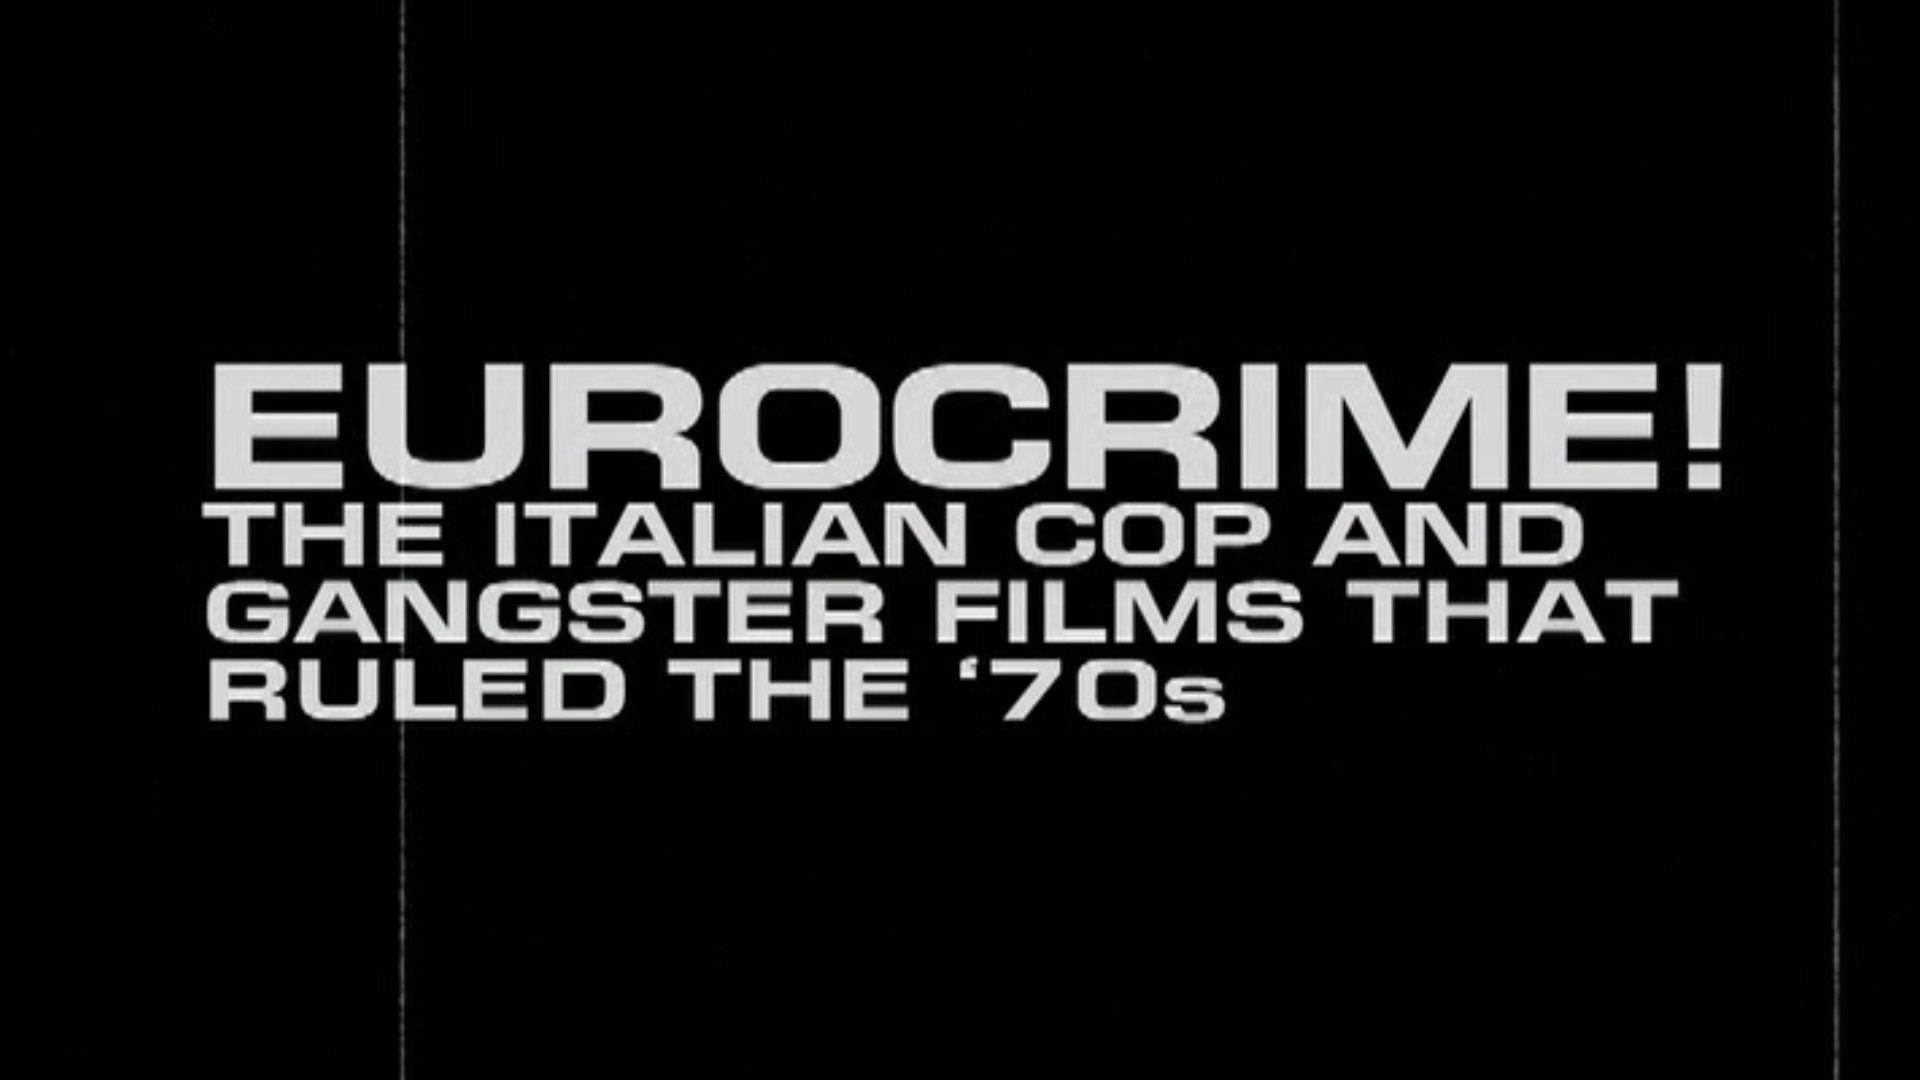 Eurocrime! The Italian Cop and Gangster Films That Ruled the '70s Backdrop